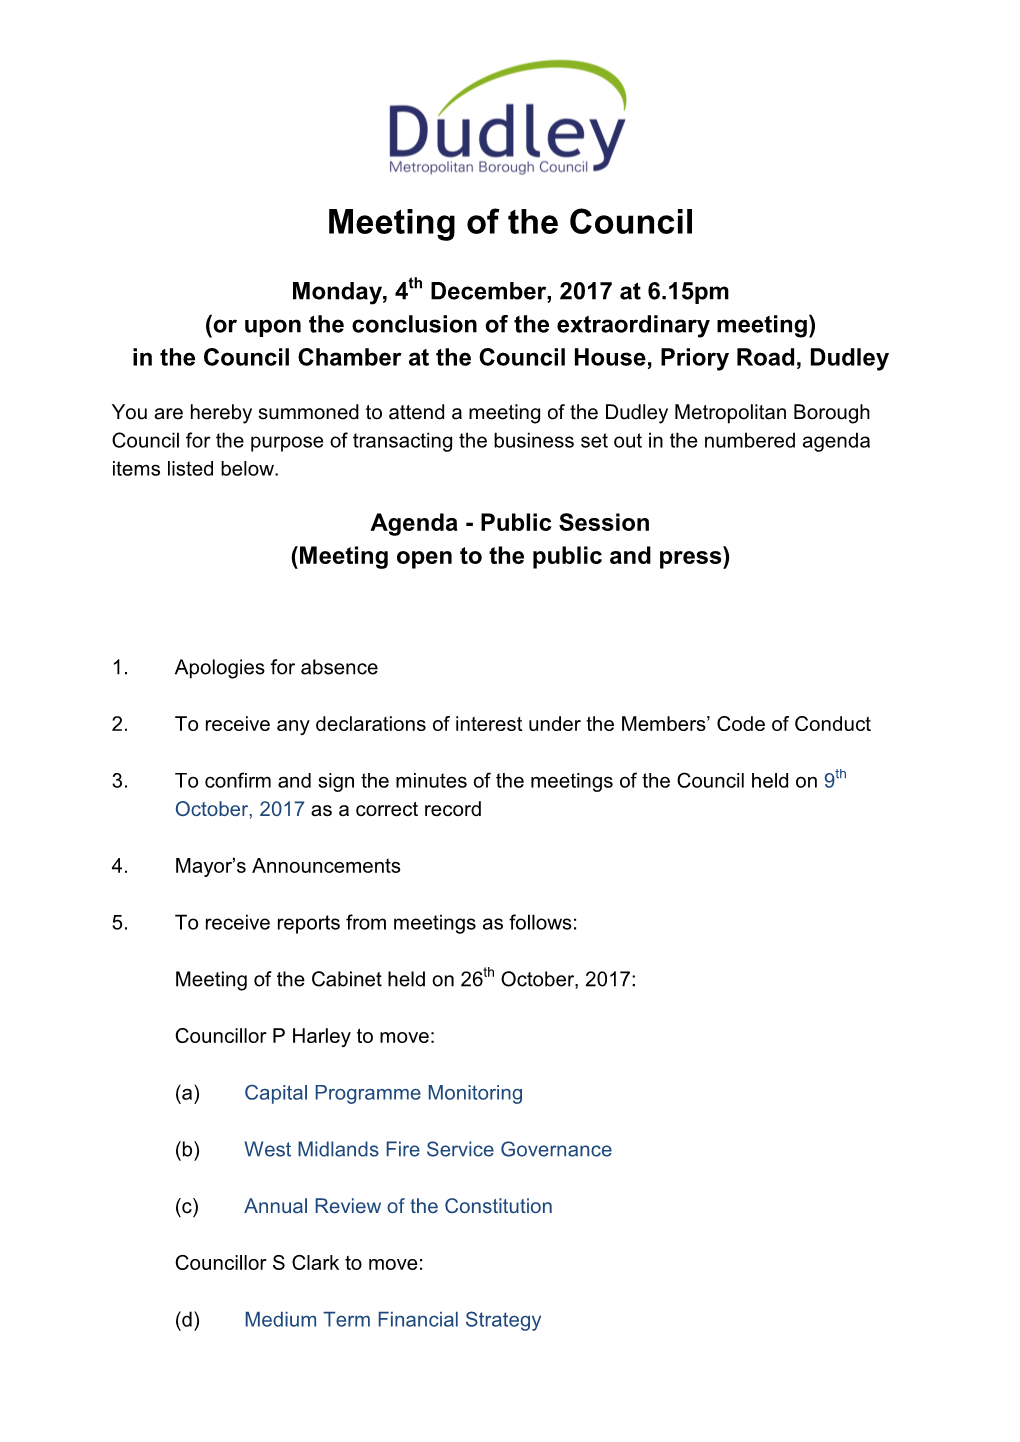 Dudley Metropolitan Borough Council for the Purpose of Transacting the Business Set out in the Numbered Agenda Items Listed Below